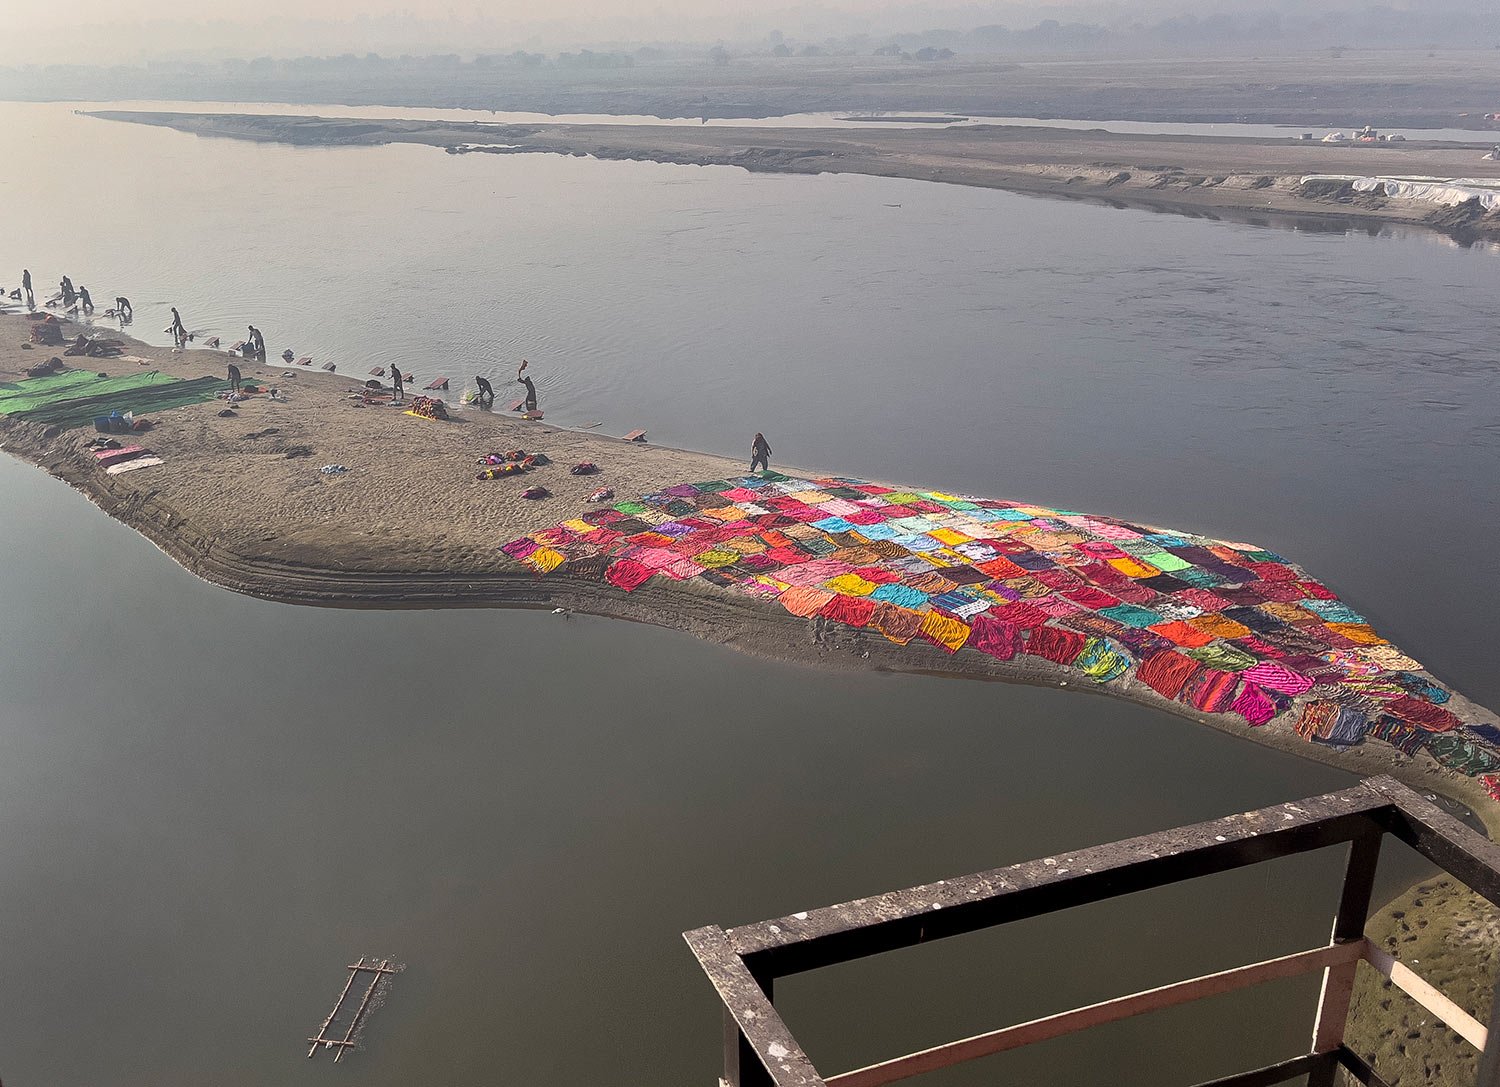  Washer men put their clothes out to dry on the banks of the River Yamuna as seen from a railway bridge near Agra, India, Saturday, Dec. 17, 2022. (AP Photo/Rajesh Kumar Singh) 